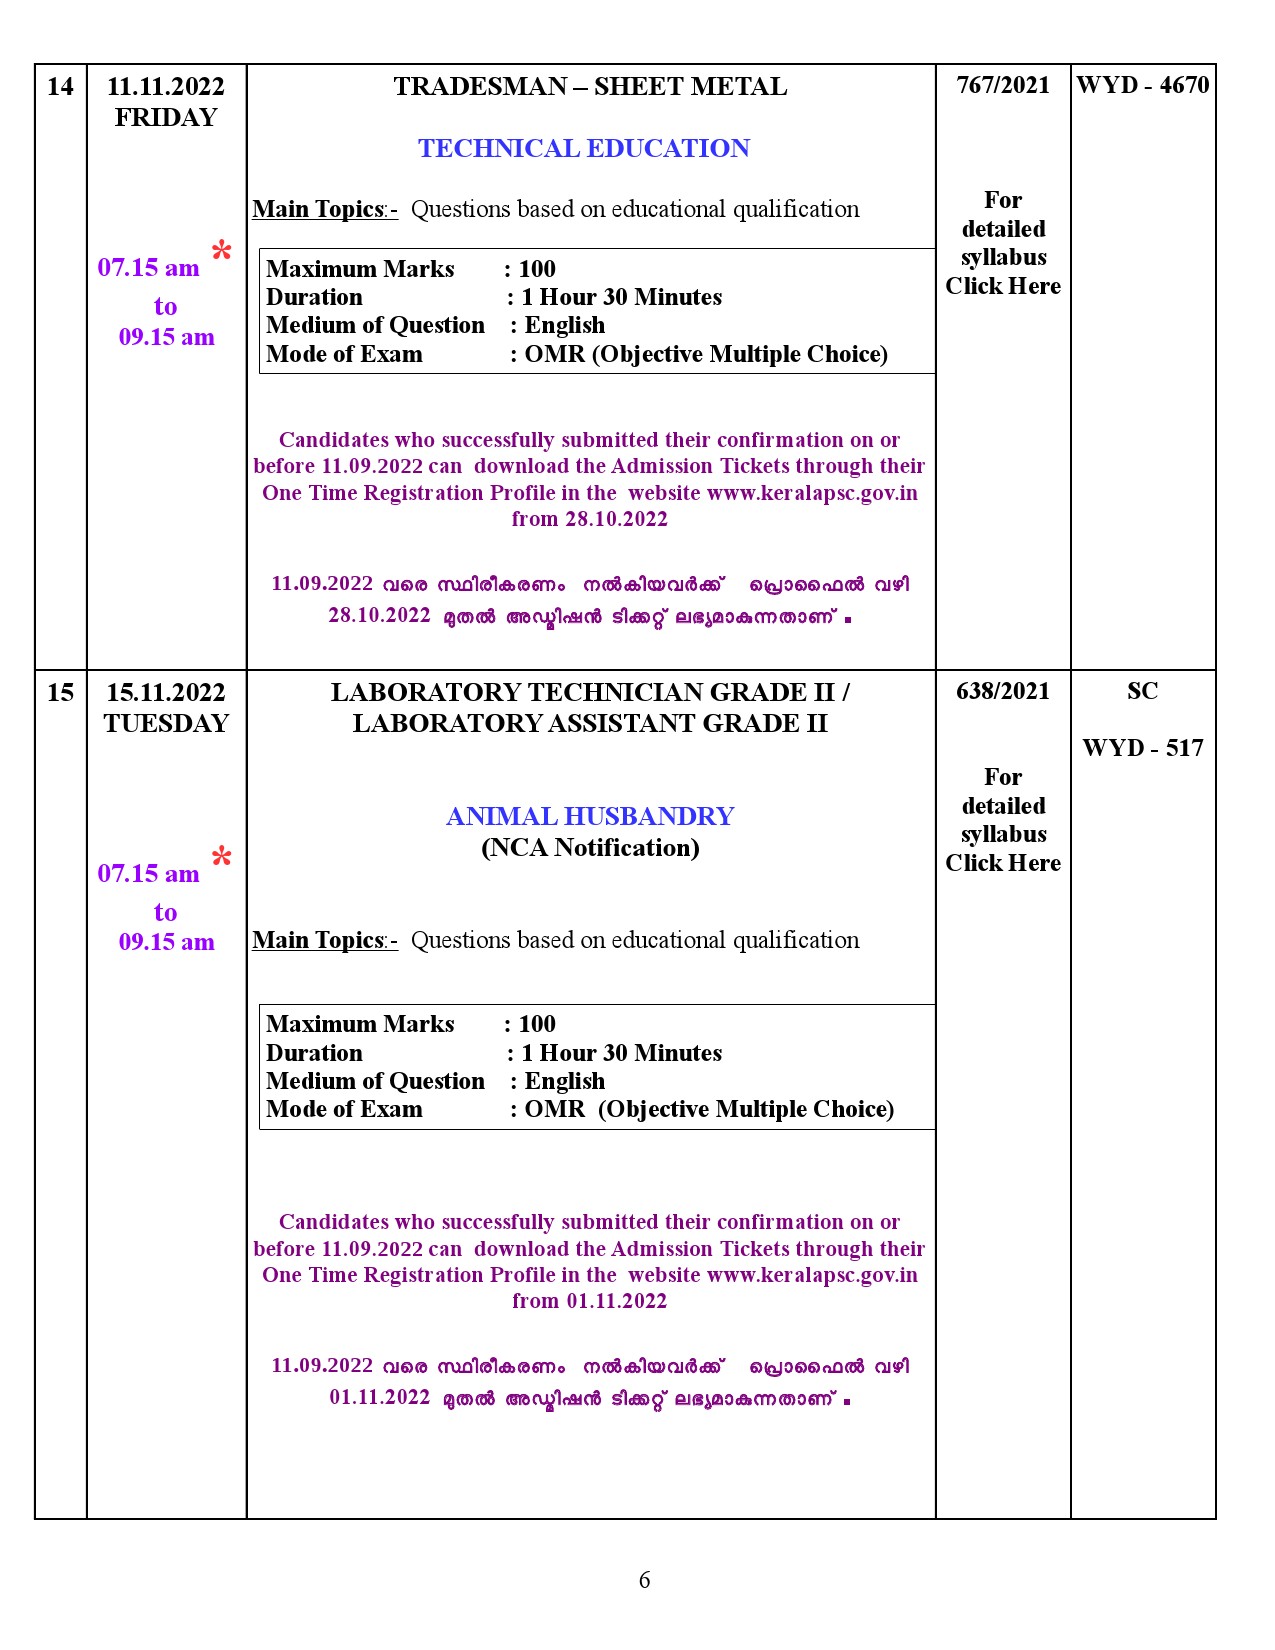 EXAMINATION PROGRAMME FOR THE MONTH OF NOVEMBER 2022 AFTER CONFIRMATION - Notification Image 6